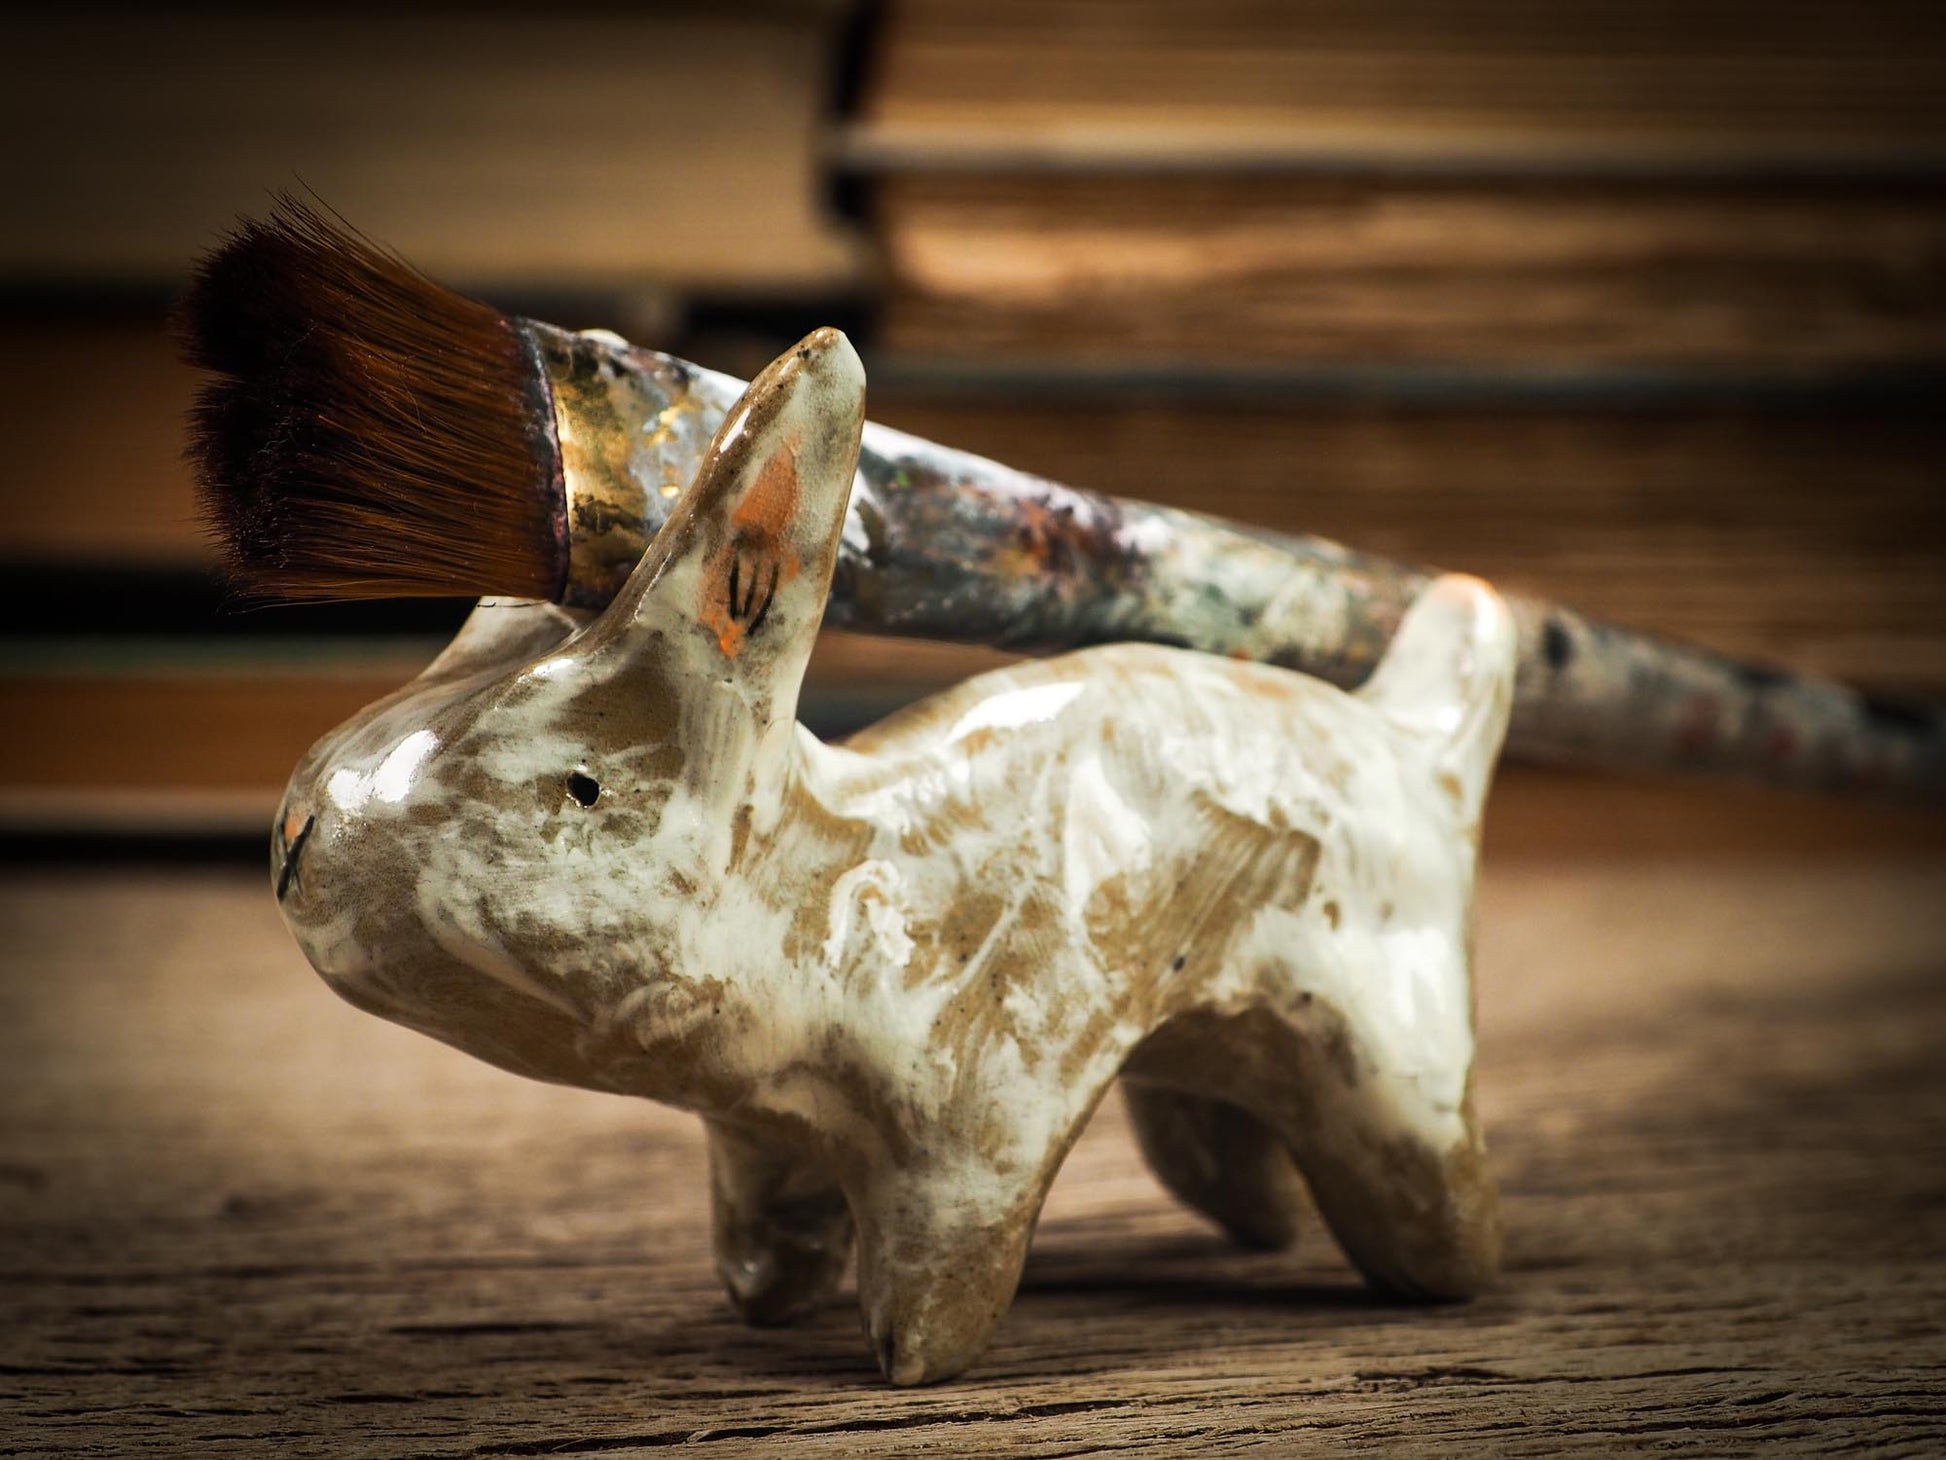 Original handmade ceramic artist color pencil brush holder rabbit by Idania Salcido, Danita Art. Unique ceramic art designed and hand built Idania Salcido beautiful handmade touch to any artist's studio with handmade glazed ceramic good for watercolors acrylics inks and oil paints. Clean with water or mineral spirits.